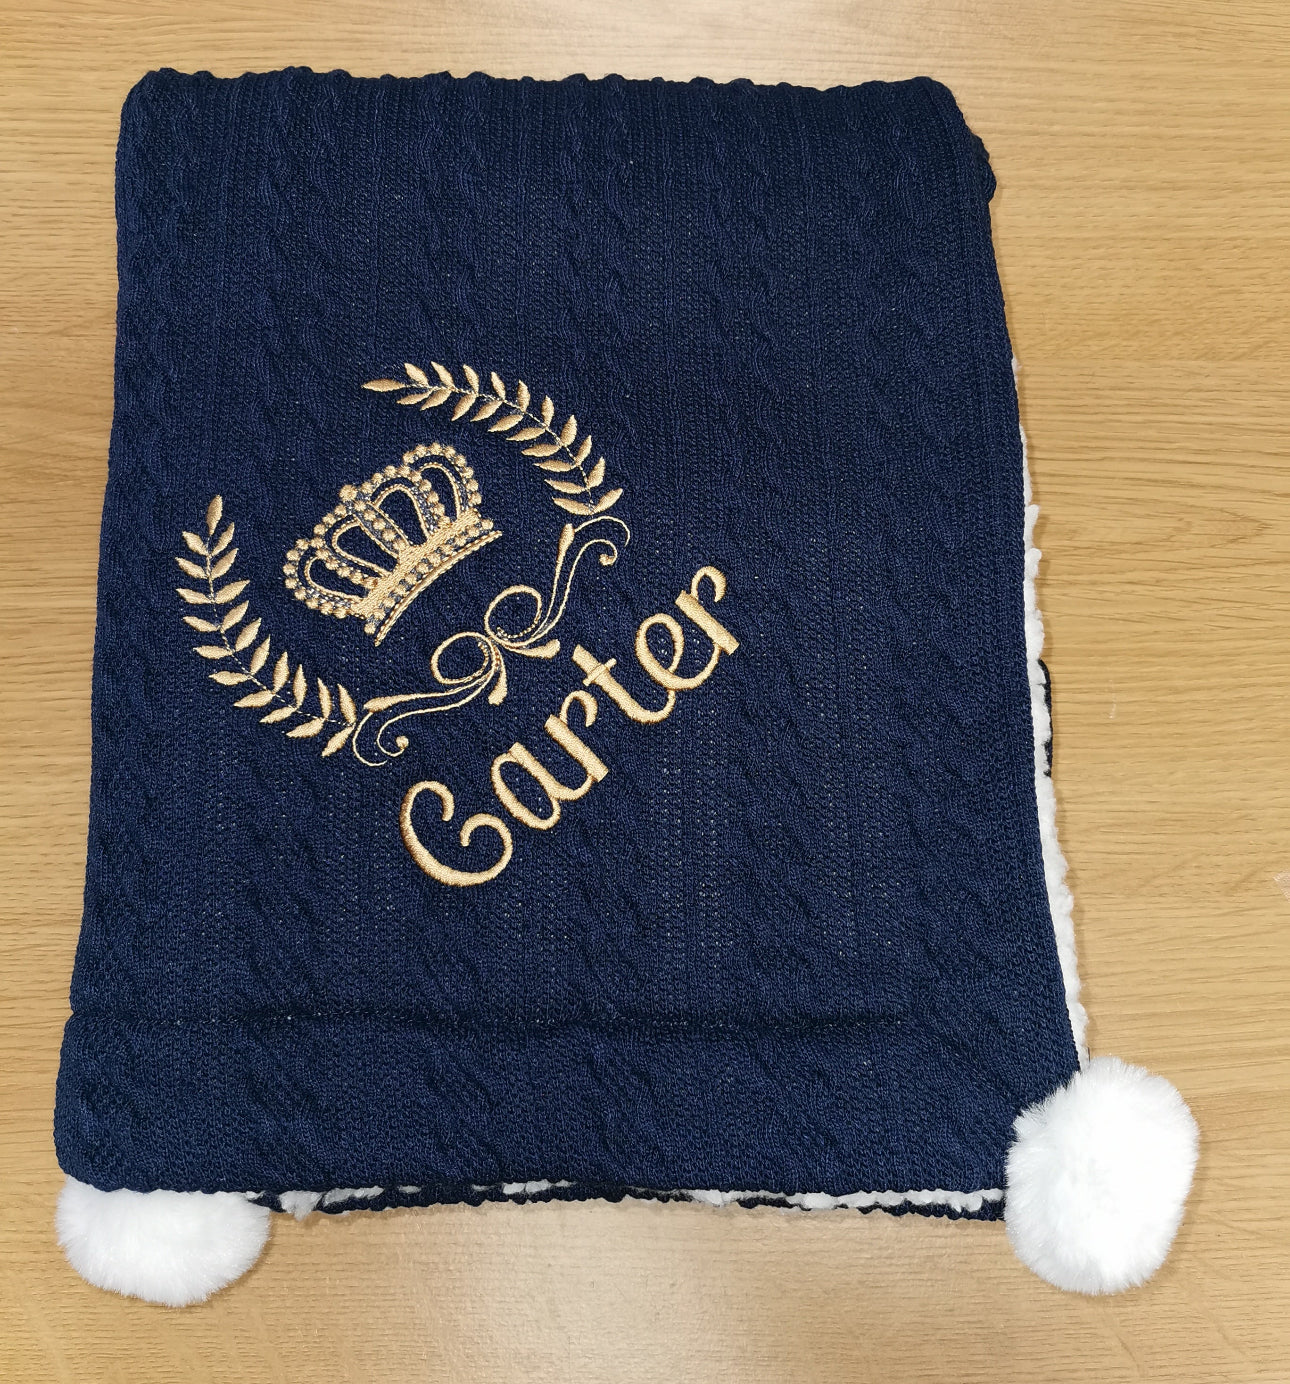 Personalised cable knit luxury blanket with crest